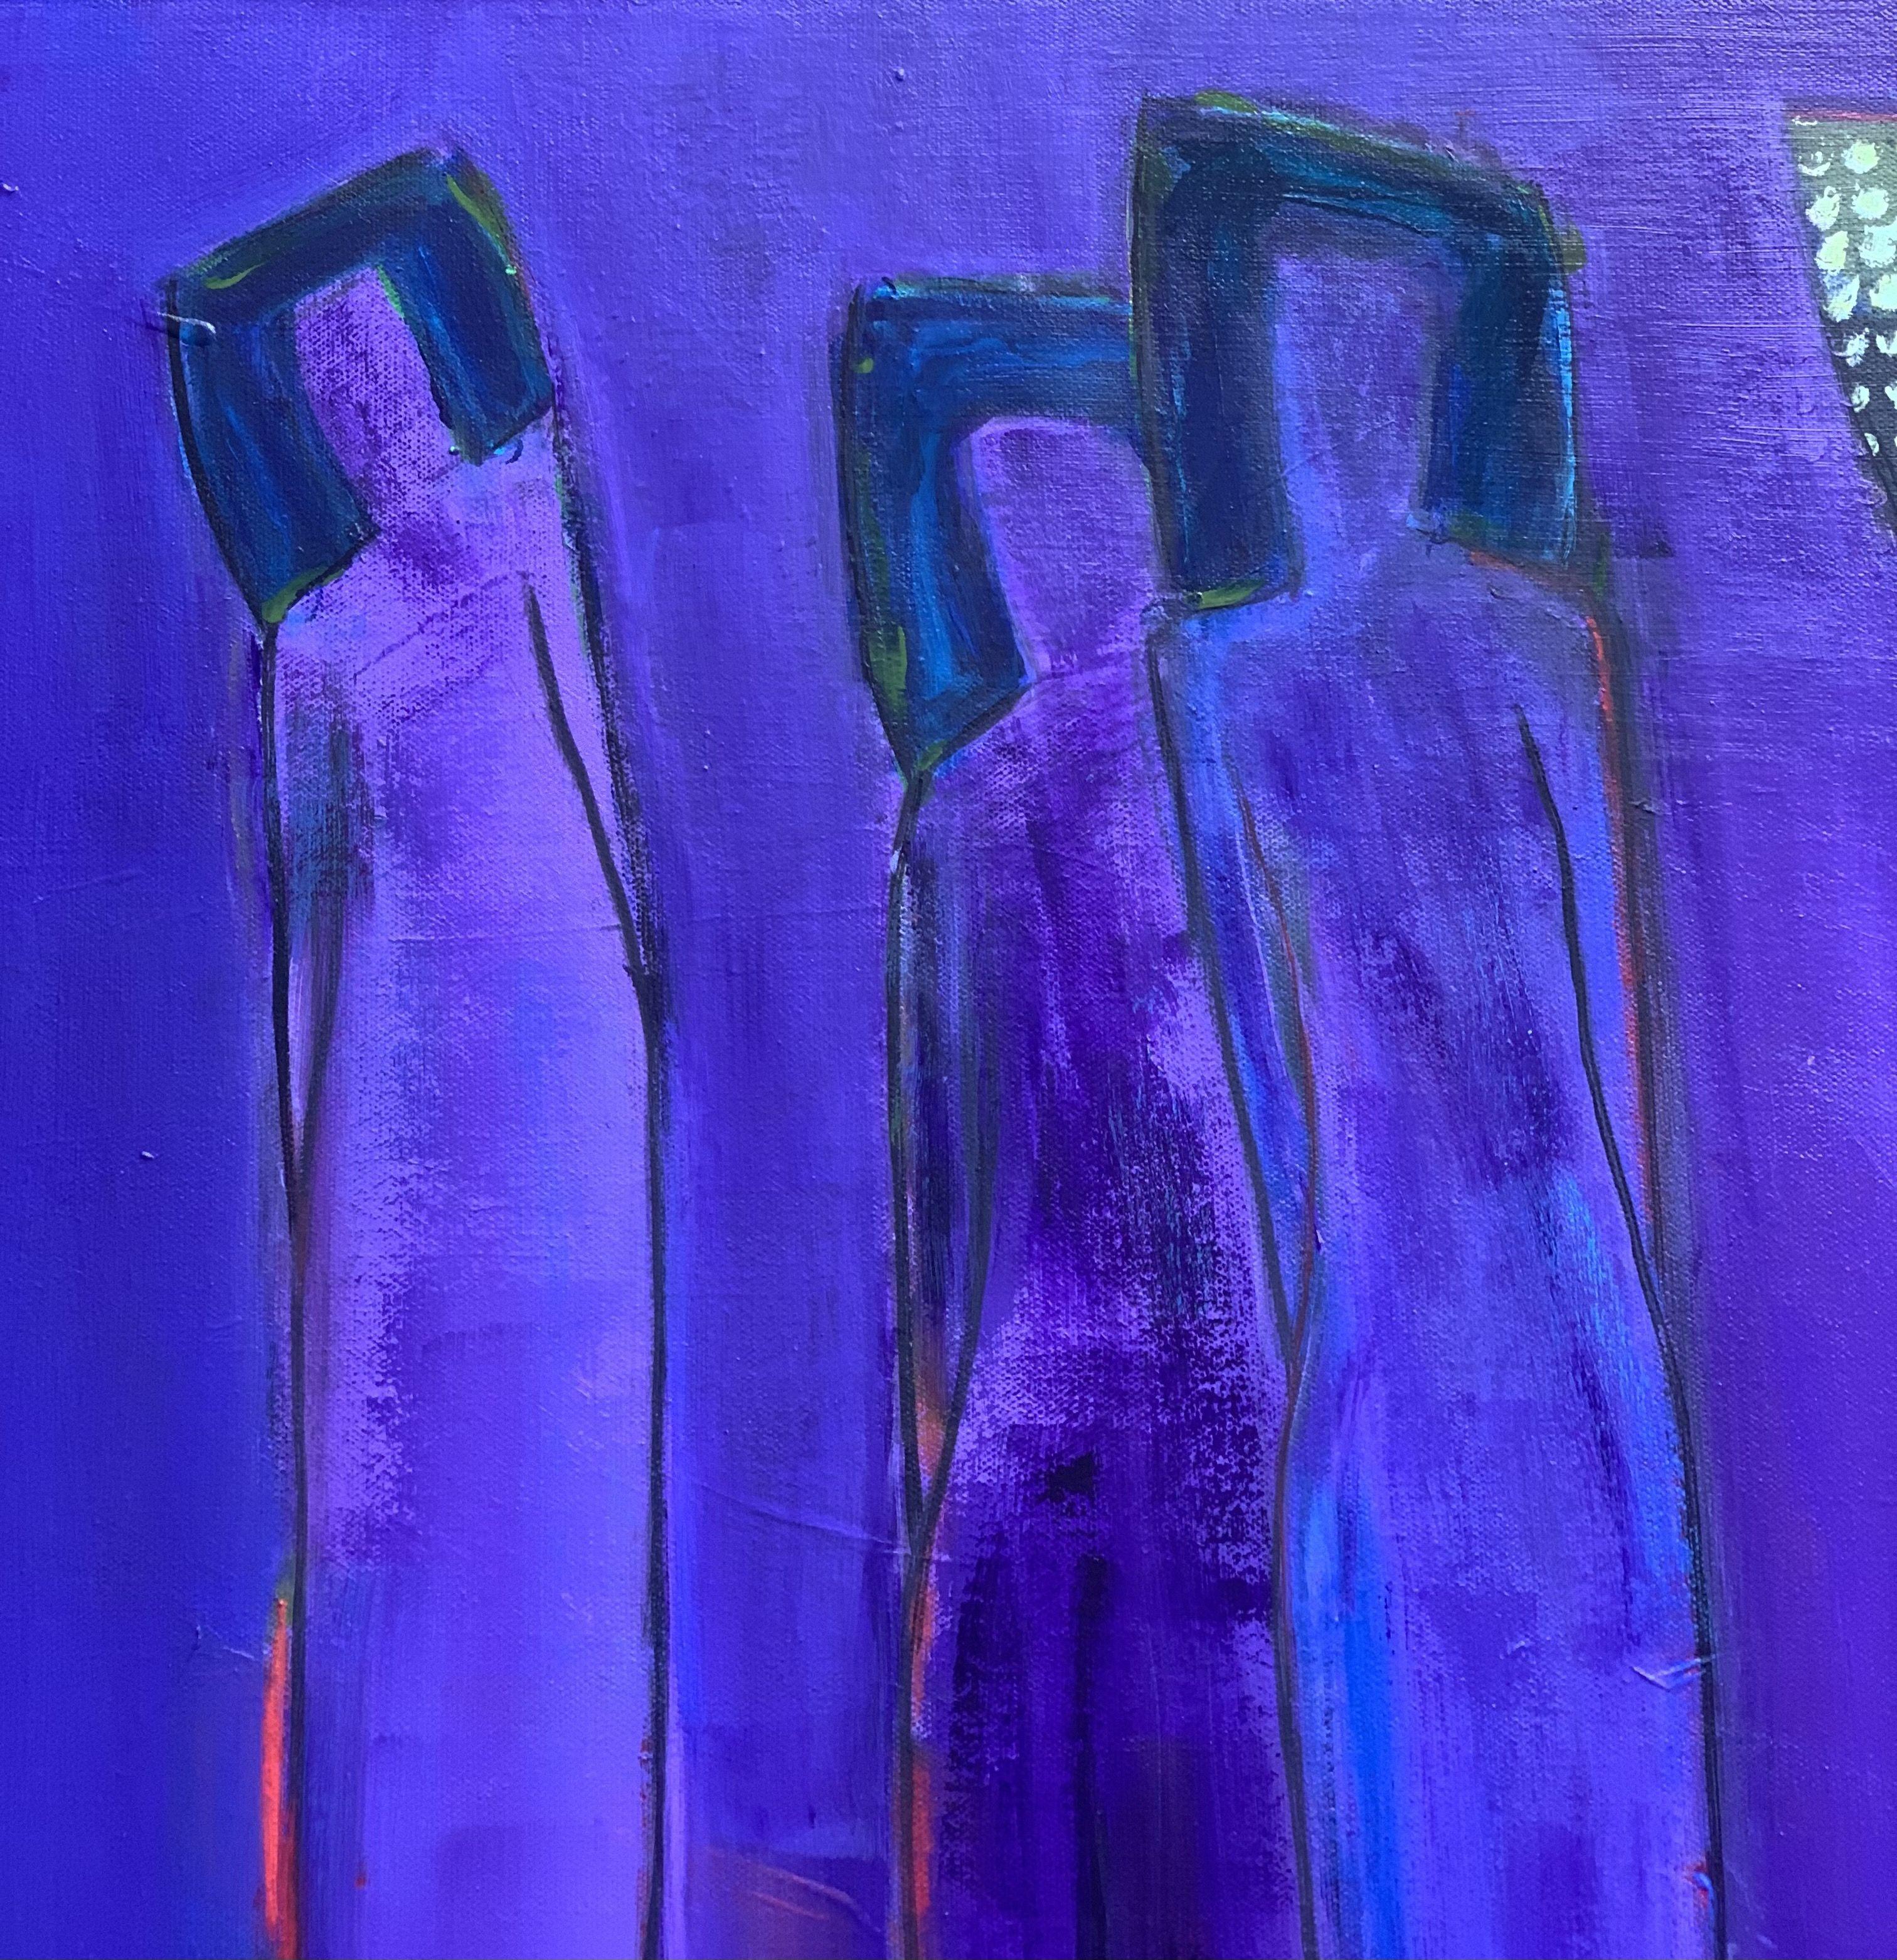   A contemporary scene by artist Robin Okun of statuesque purple figures fuses with a striking  purple backdrop. The patterned abstract shapes of black, red, and green create a striking counterpoint of mystery and fantasy.   :: Painting ::